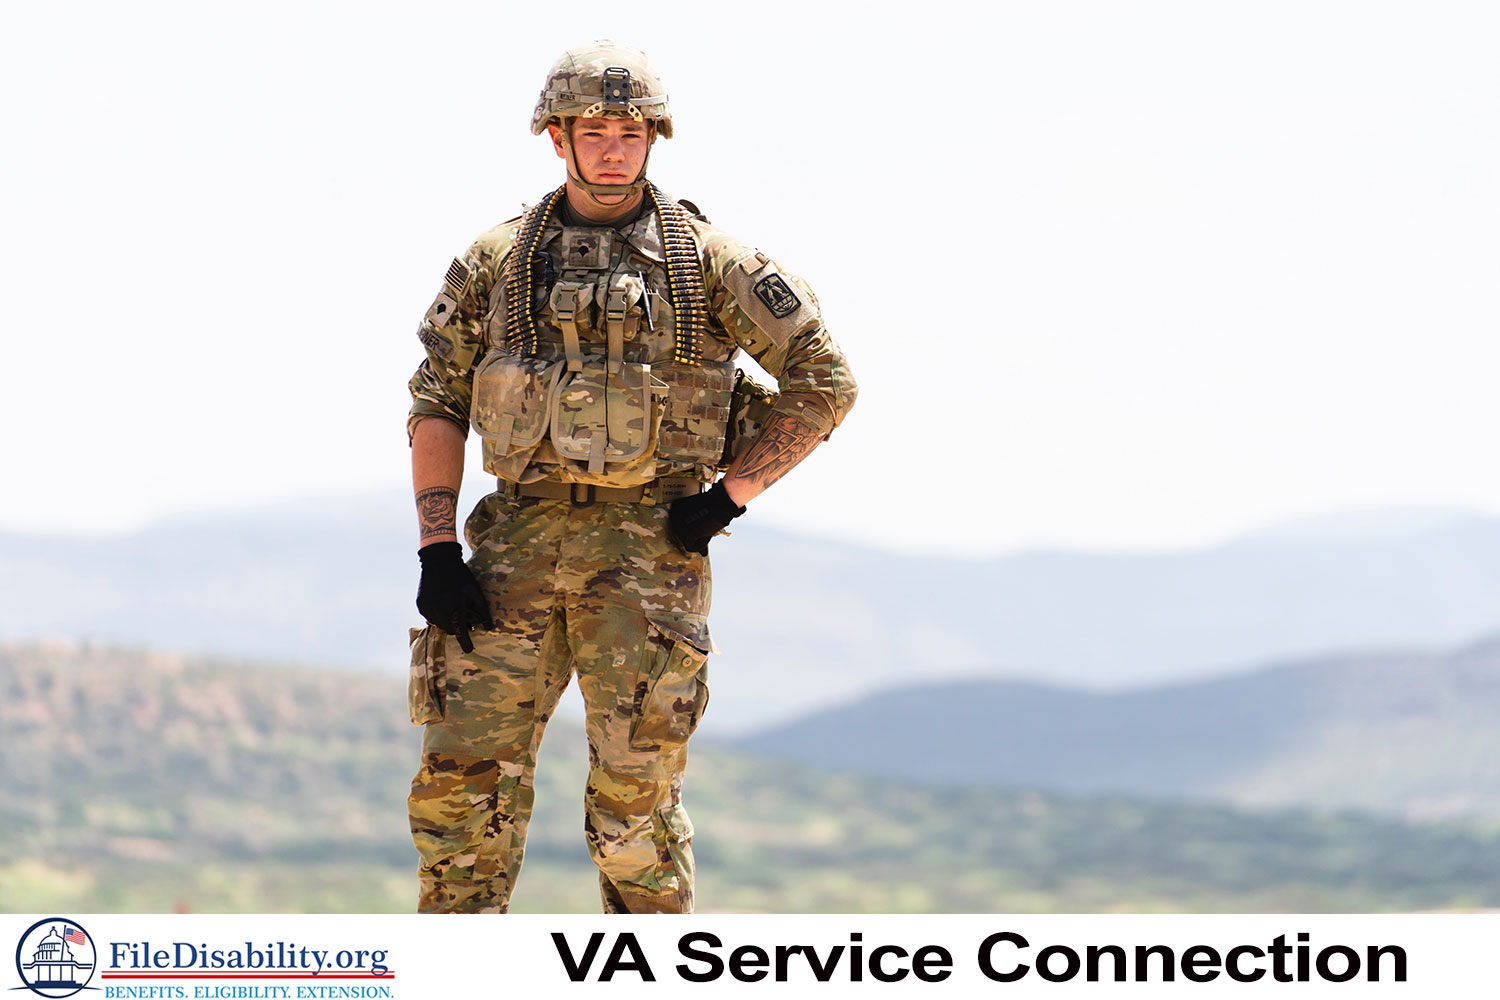 What Is a VA Service Connection?